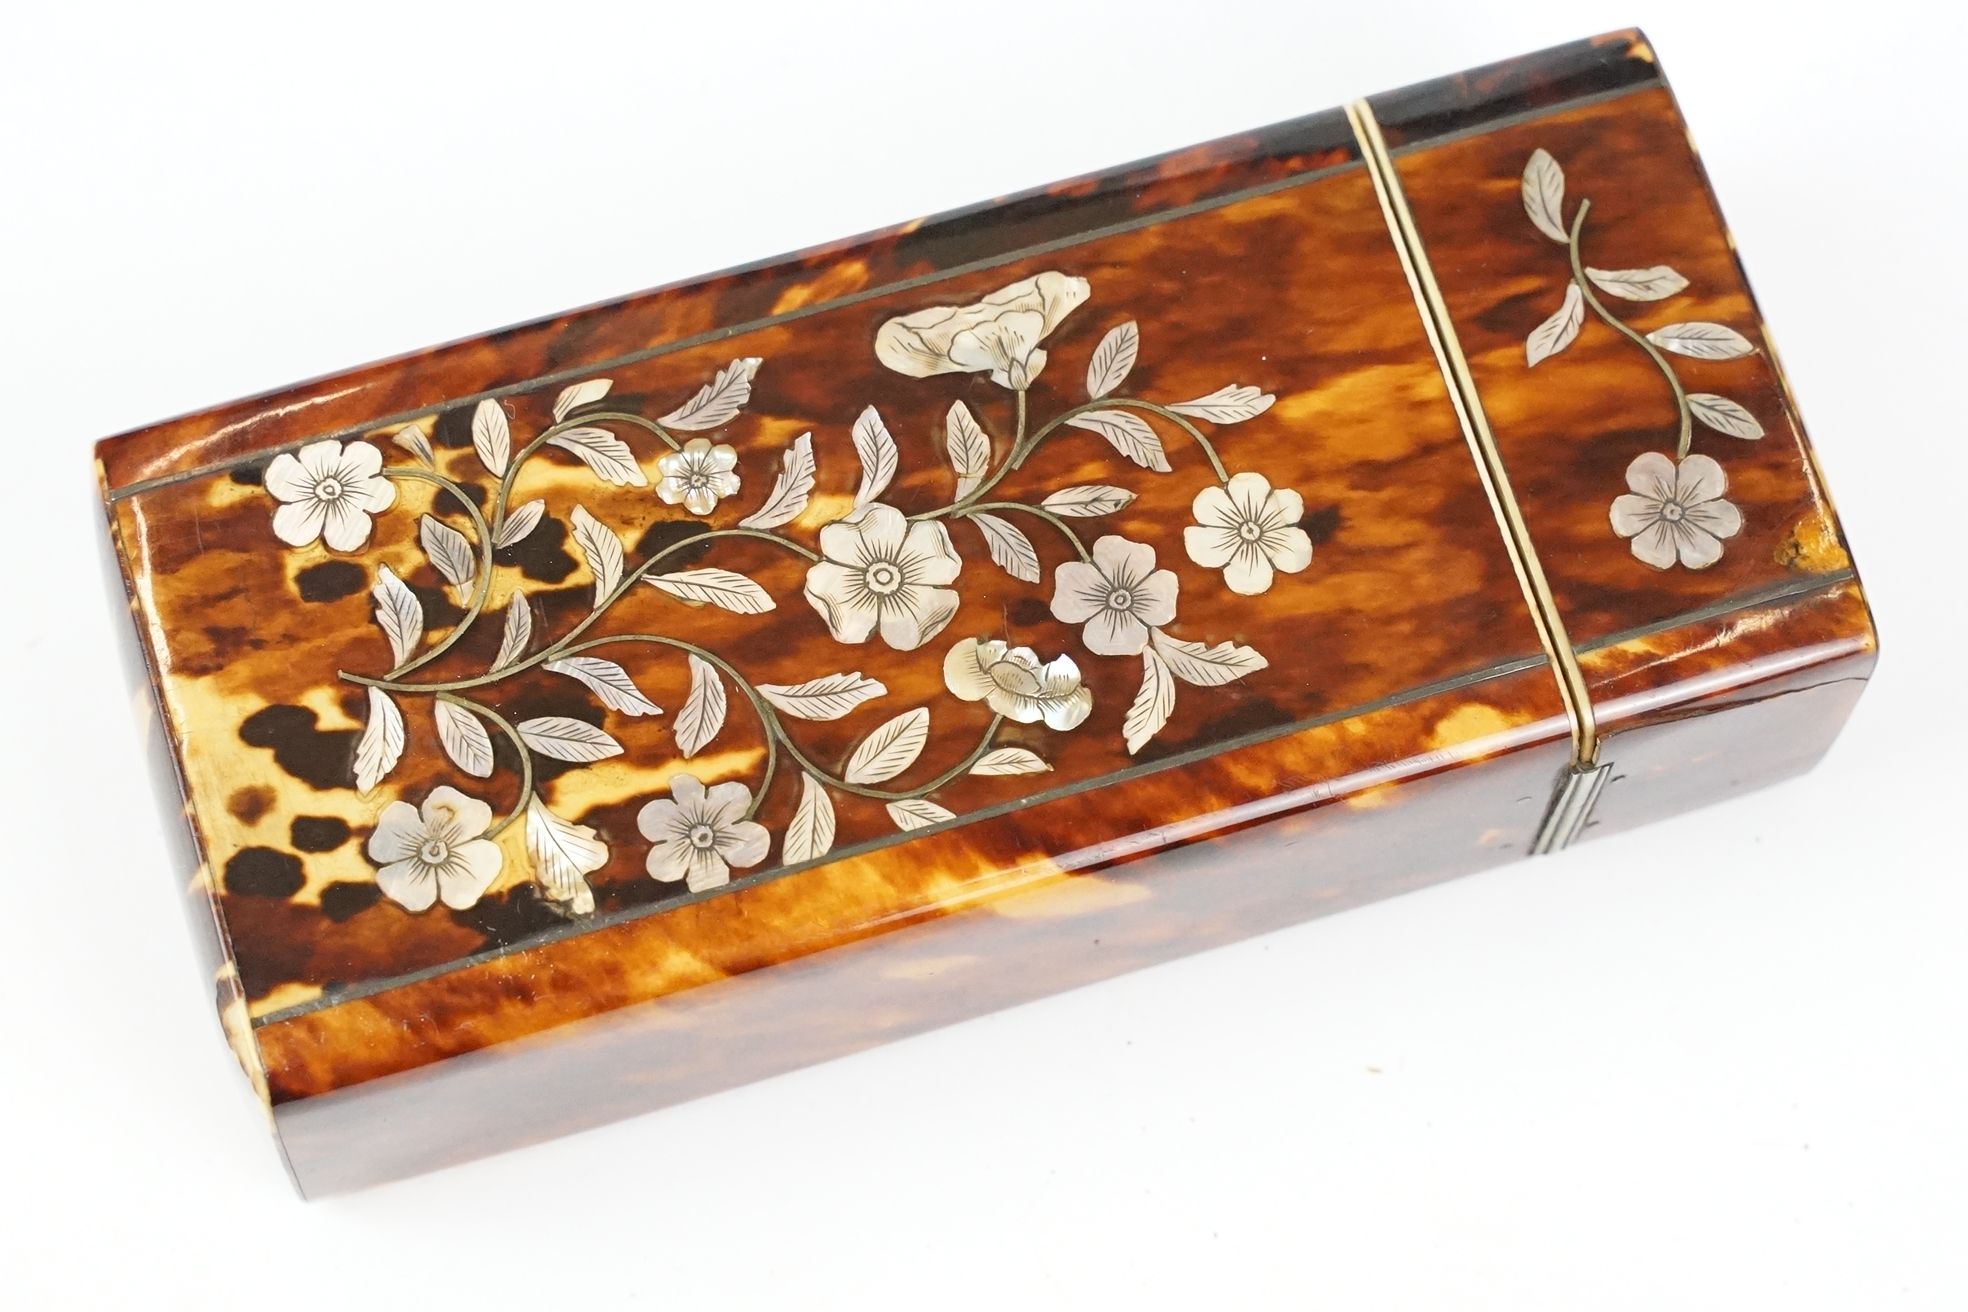 An early 20th century tortoiseshell spectacle case with mother of pearl floral decoration. - Image 3 of 6